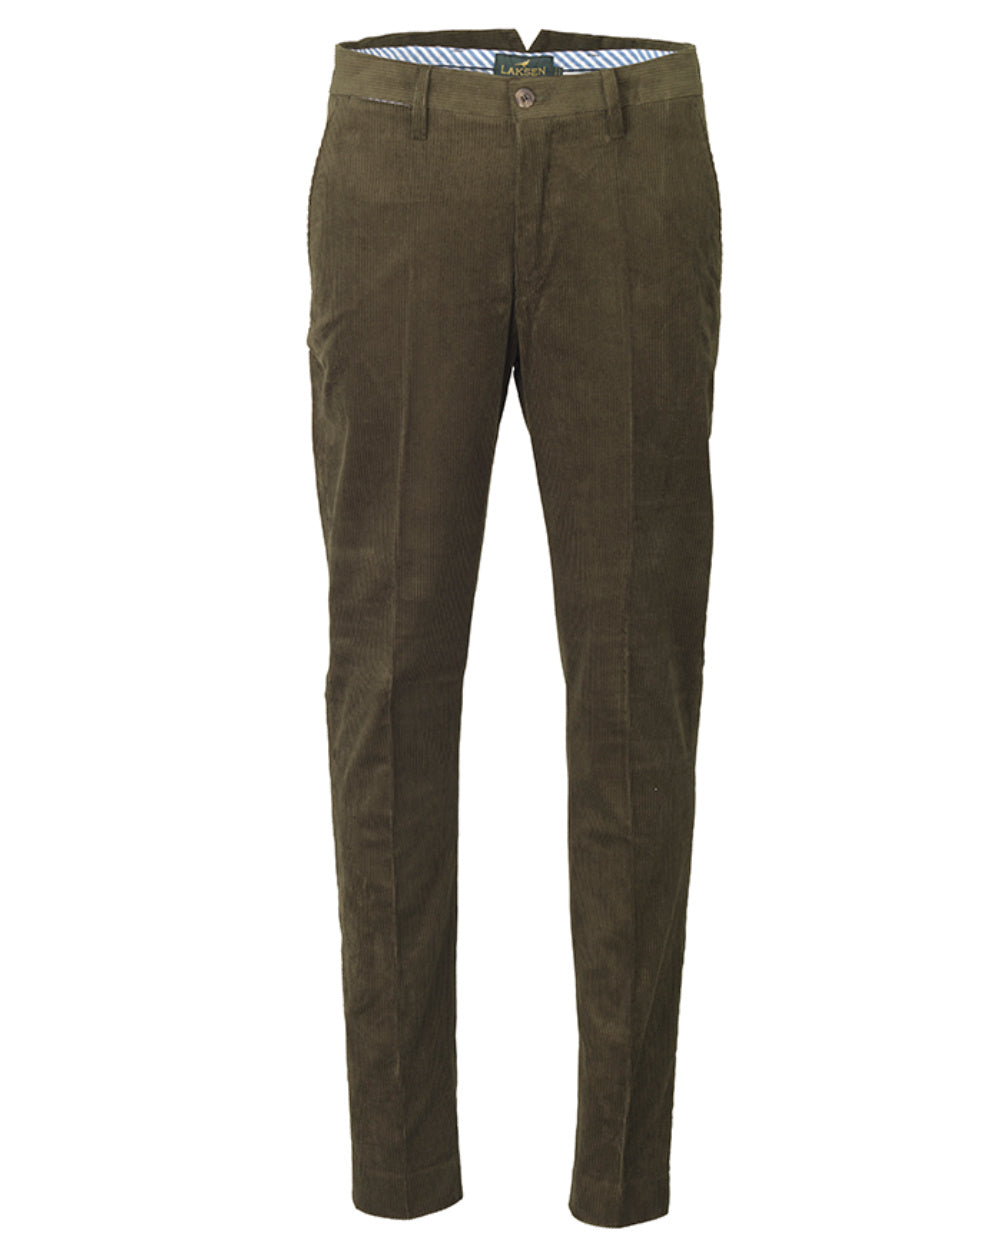 Forest Green Coloured Laksen Mayfair Corduroy Trousers On A White Background 